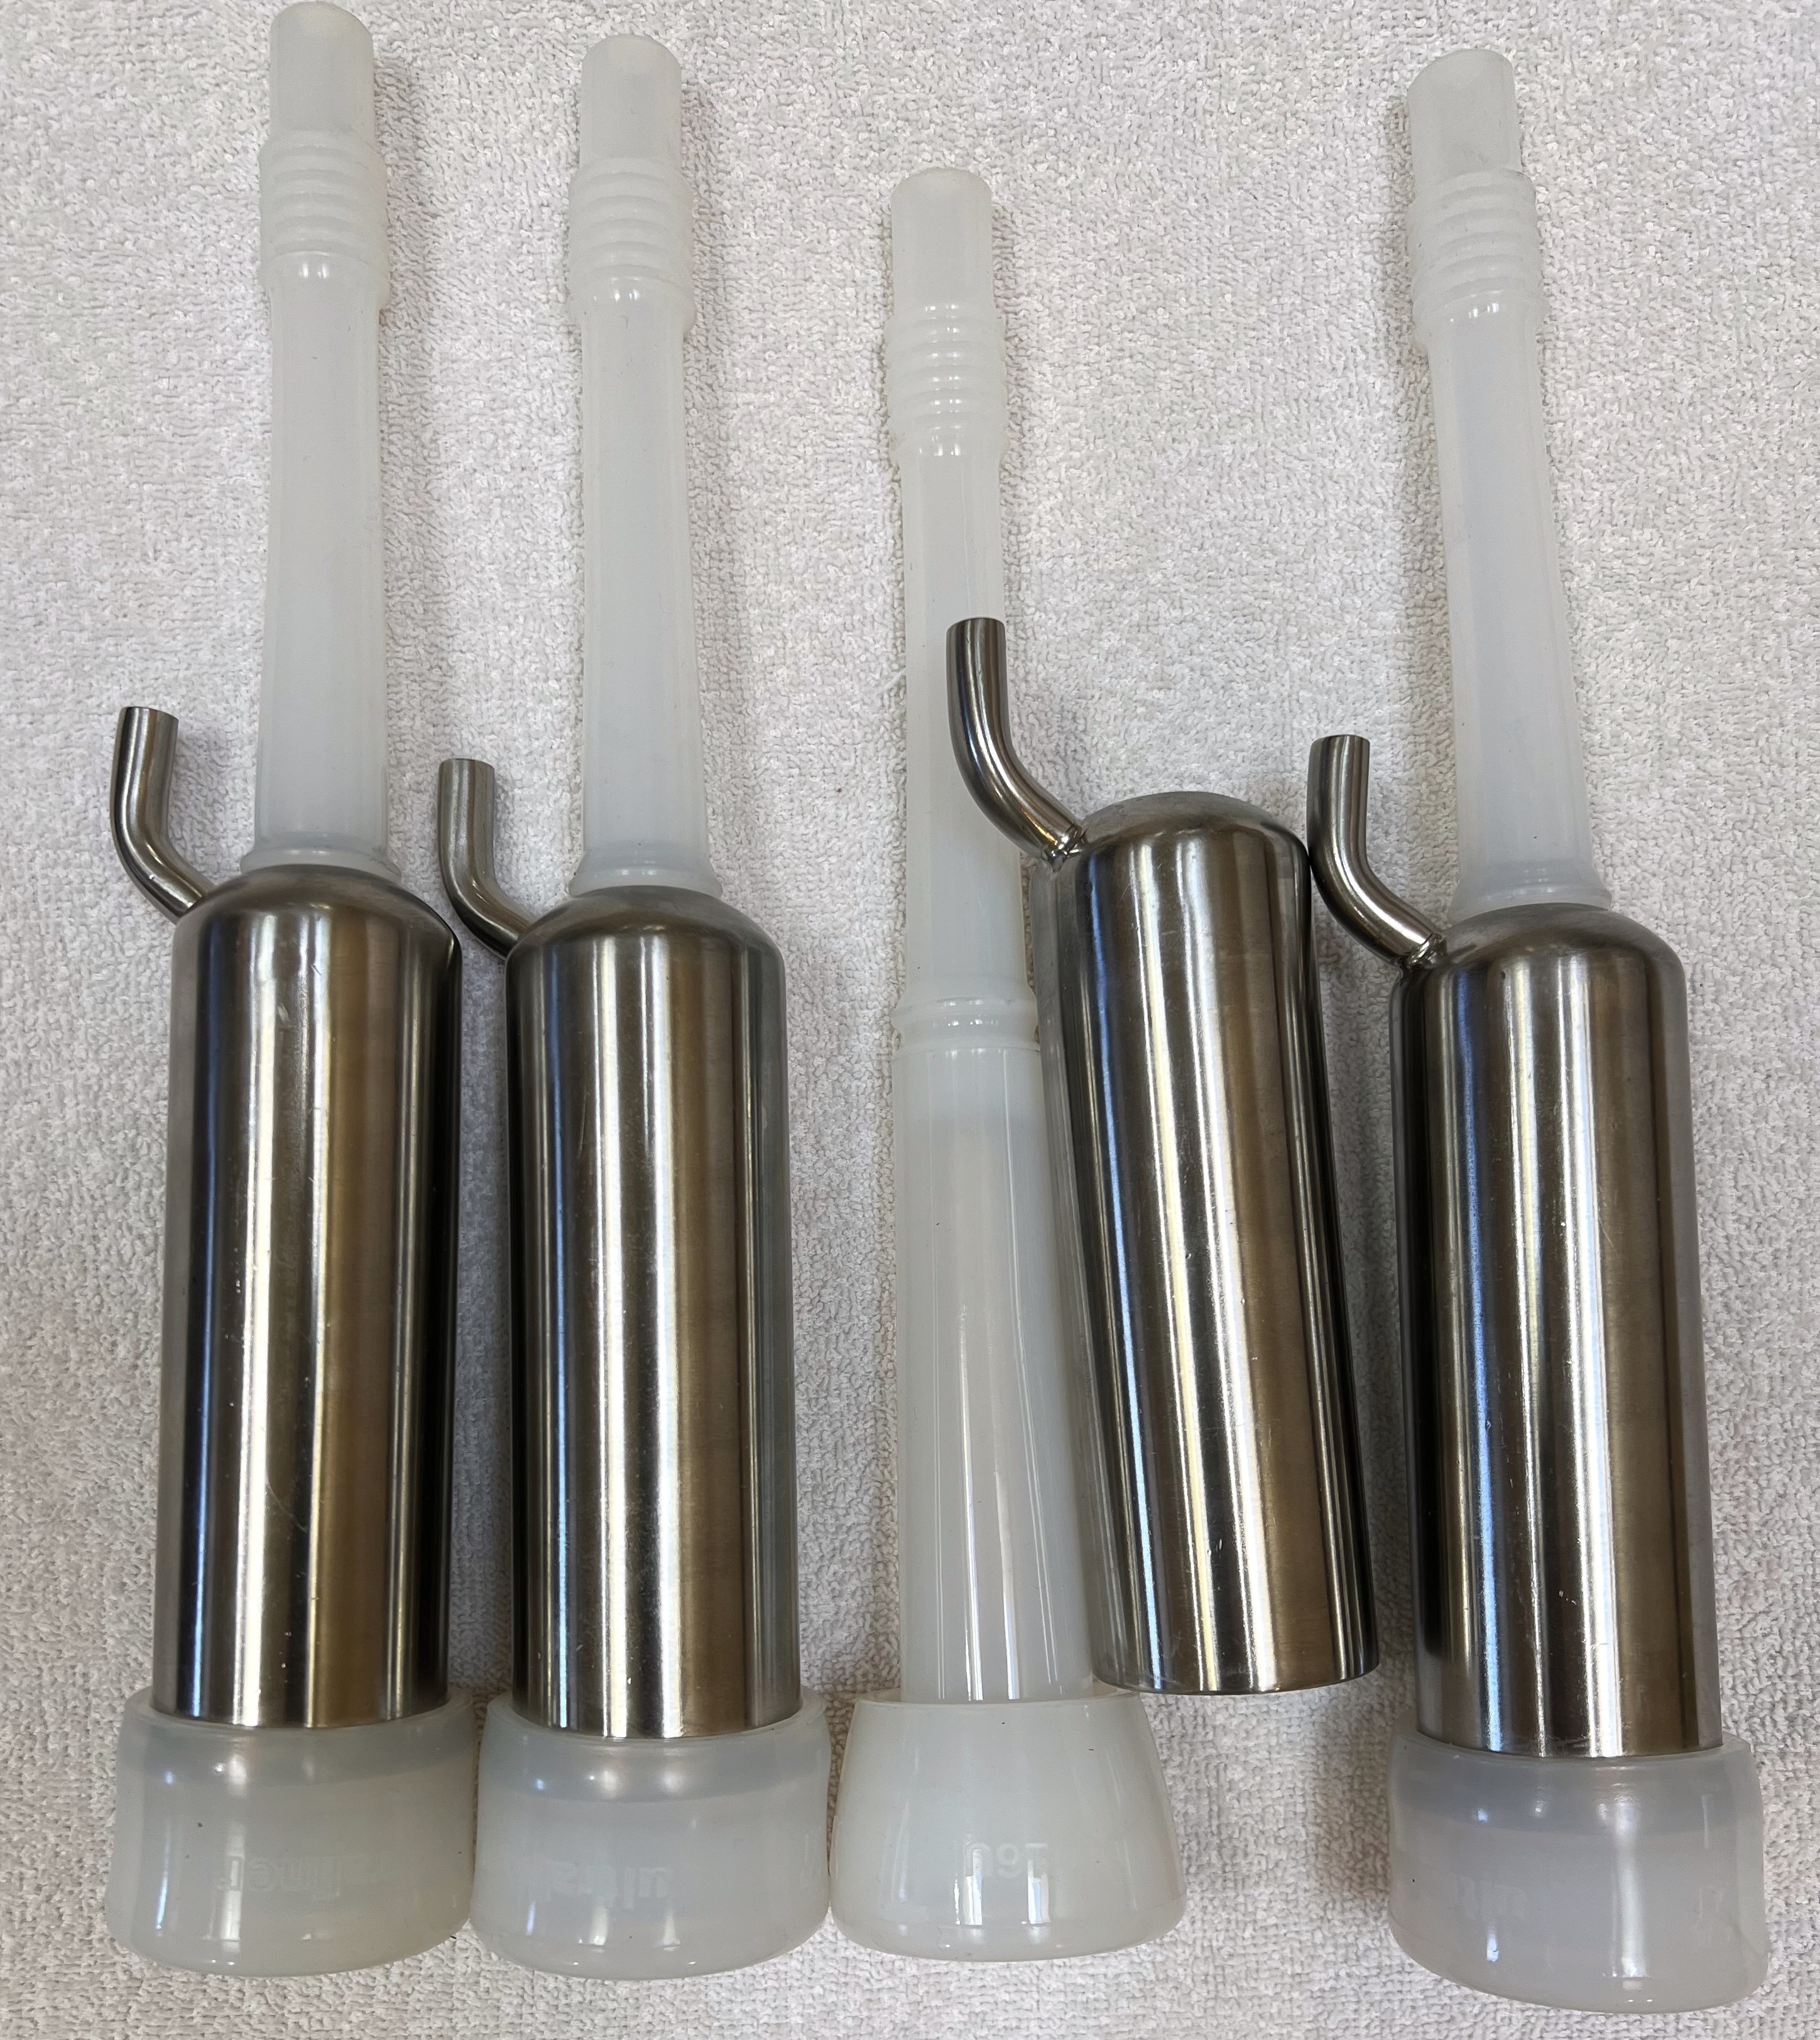 Goat Claw Cluster with automatic shut-off/open, cup-end claws, clear  plastic shell and silicone liners